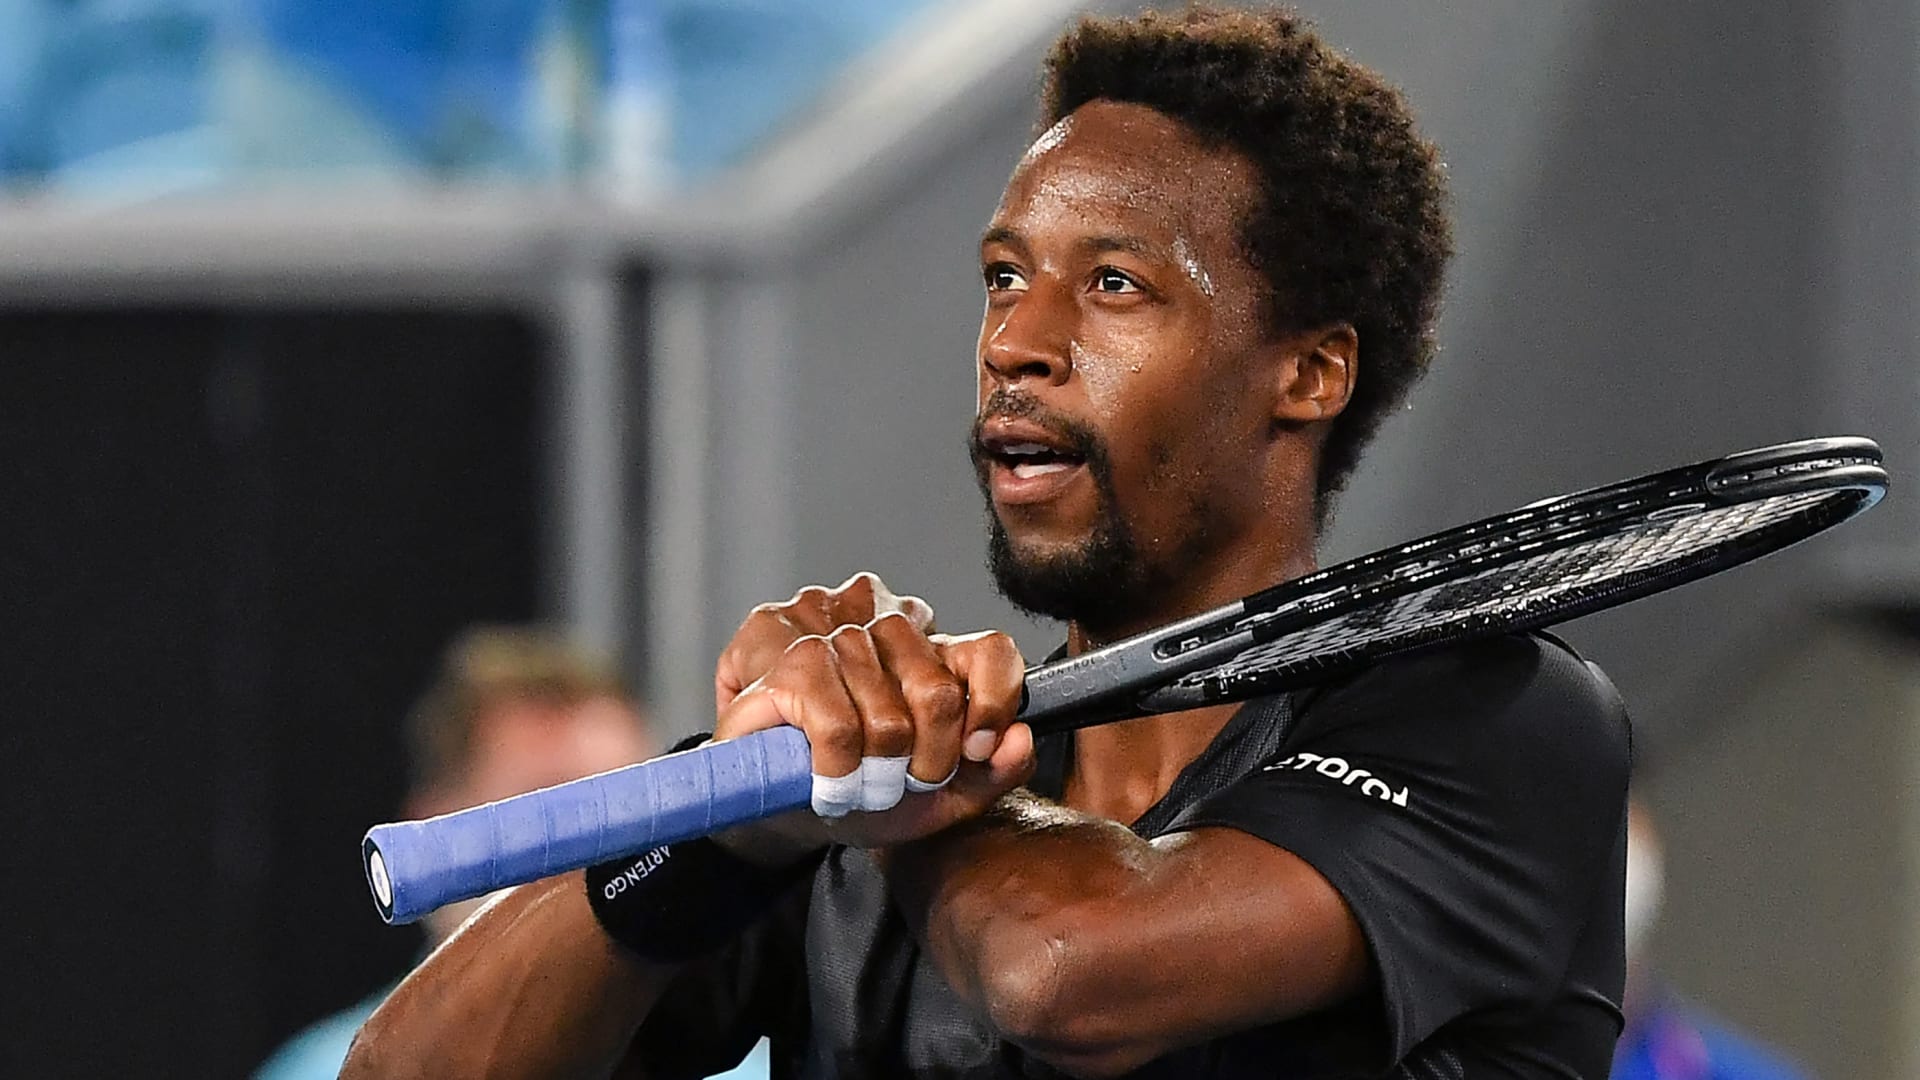 Player of the Day Gael Monfils